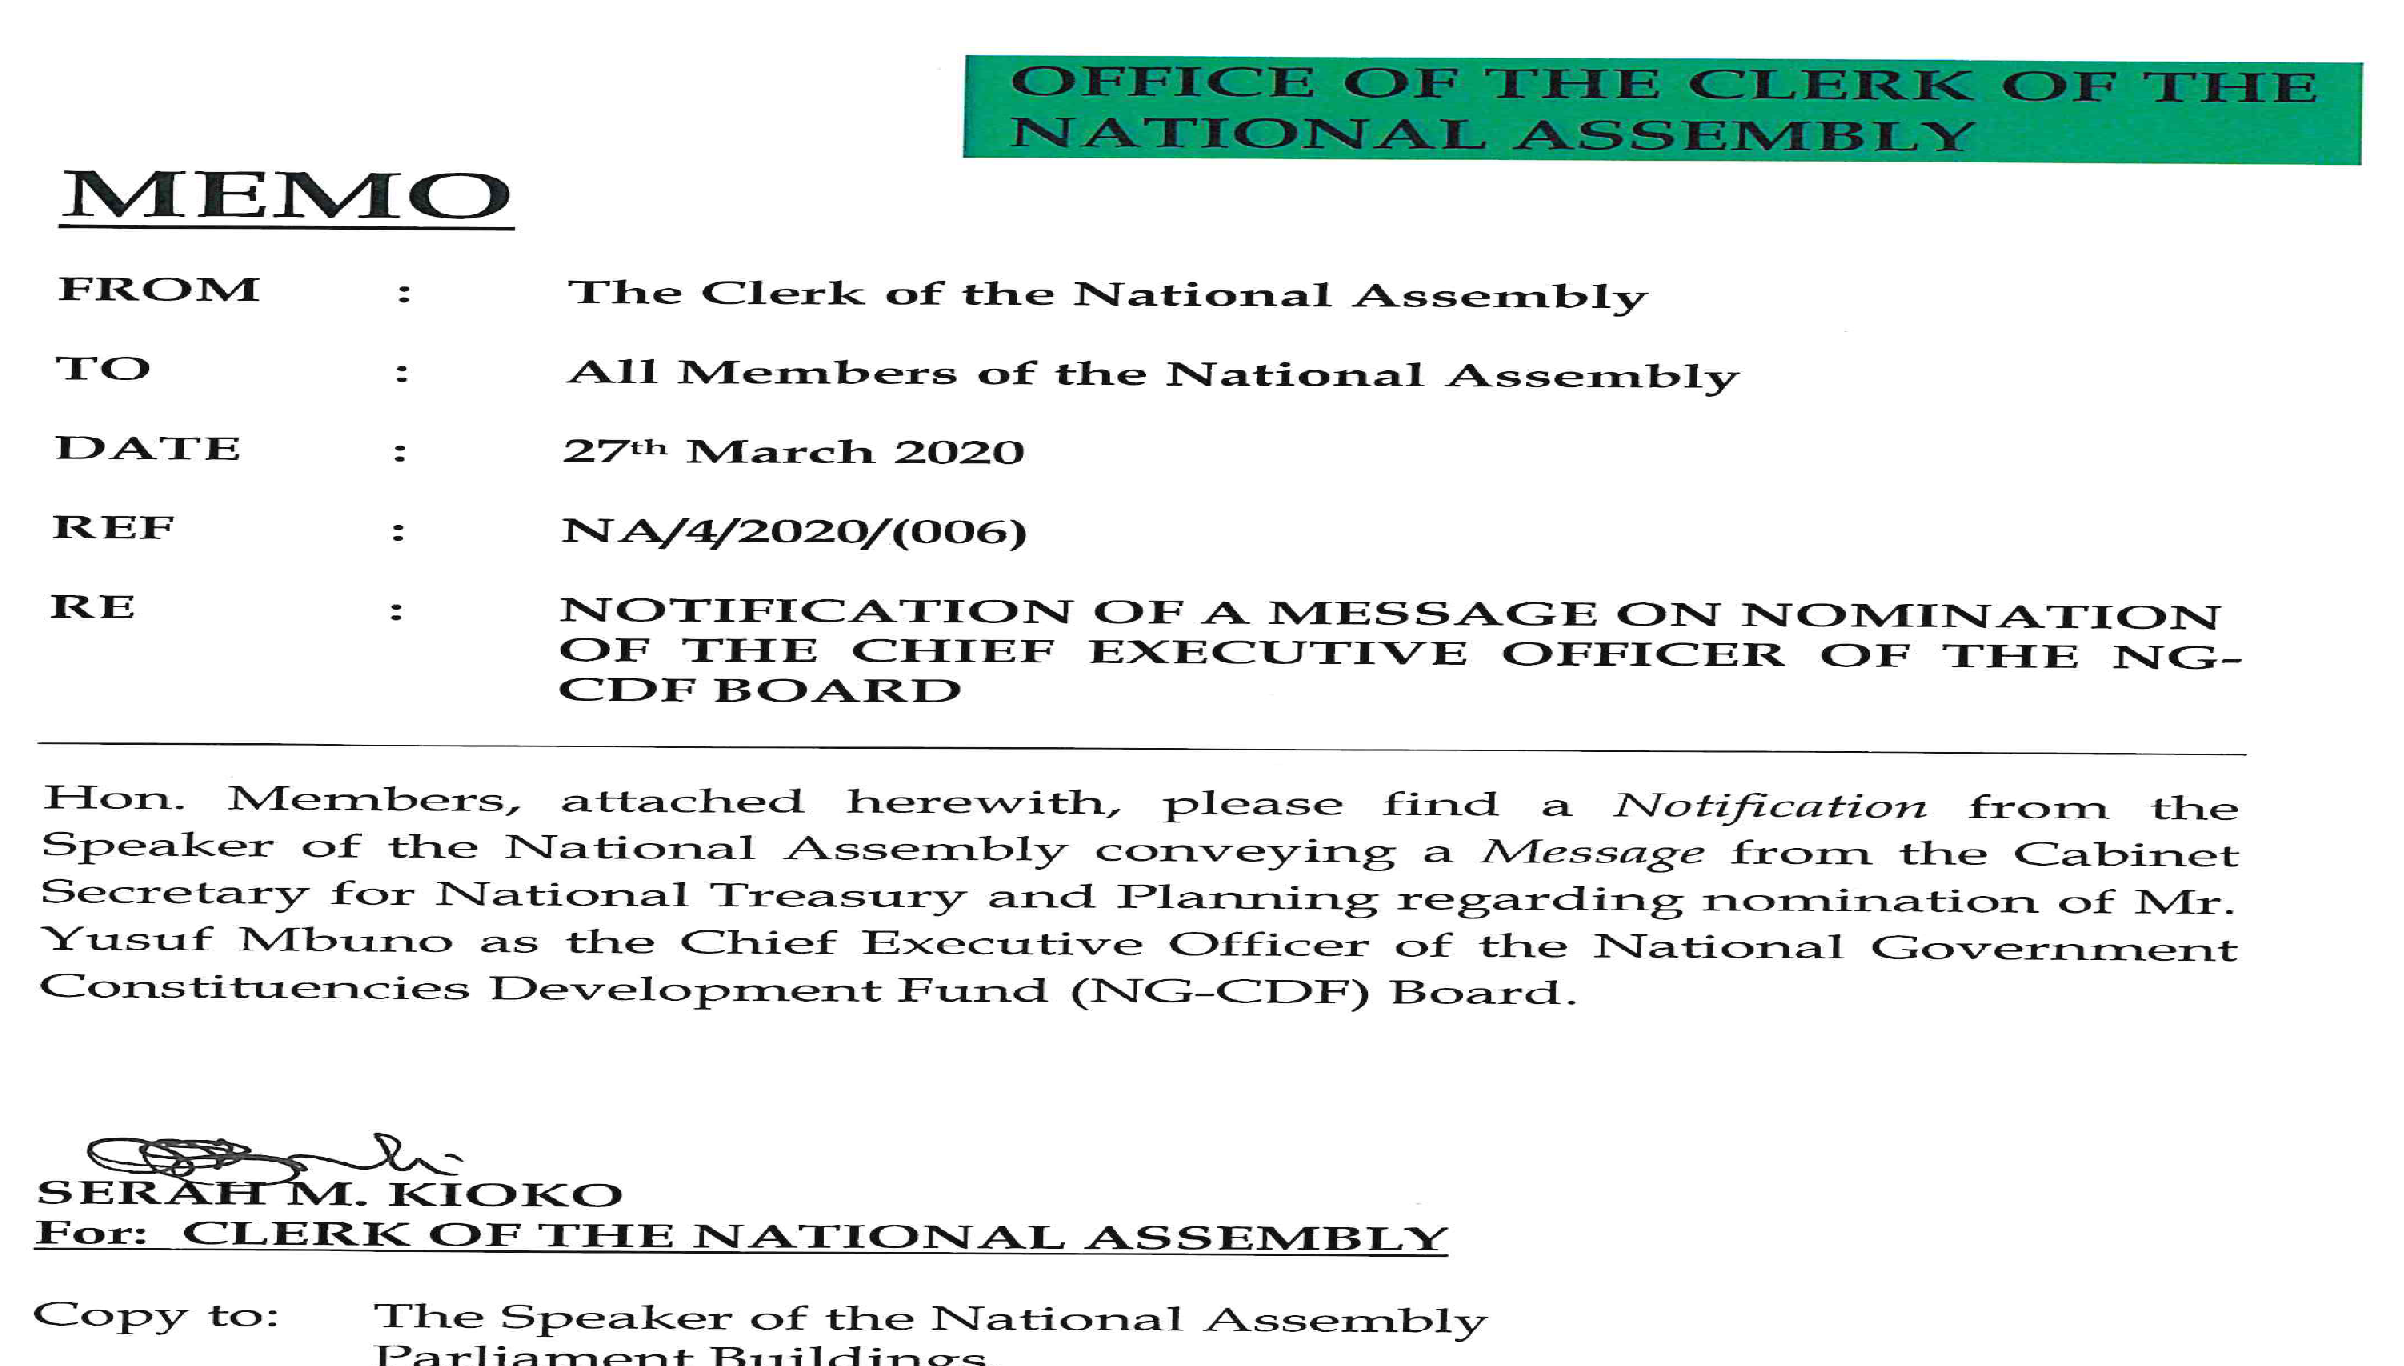 NOTIFICATION OF A MESSAGE ON NOMINATION OF THE CHIEF EXECUTIVE OFFICER OF THE NG-CDF BOARD